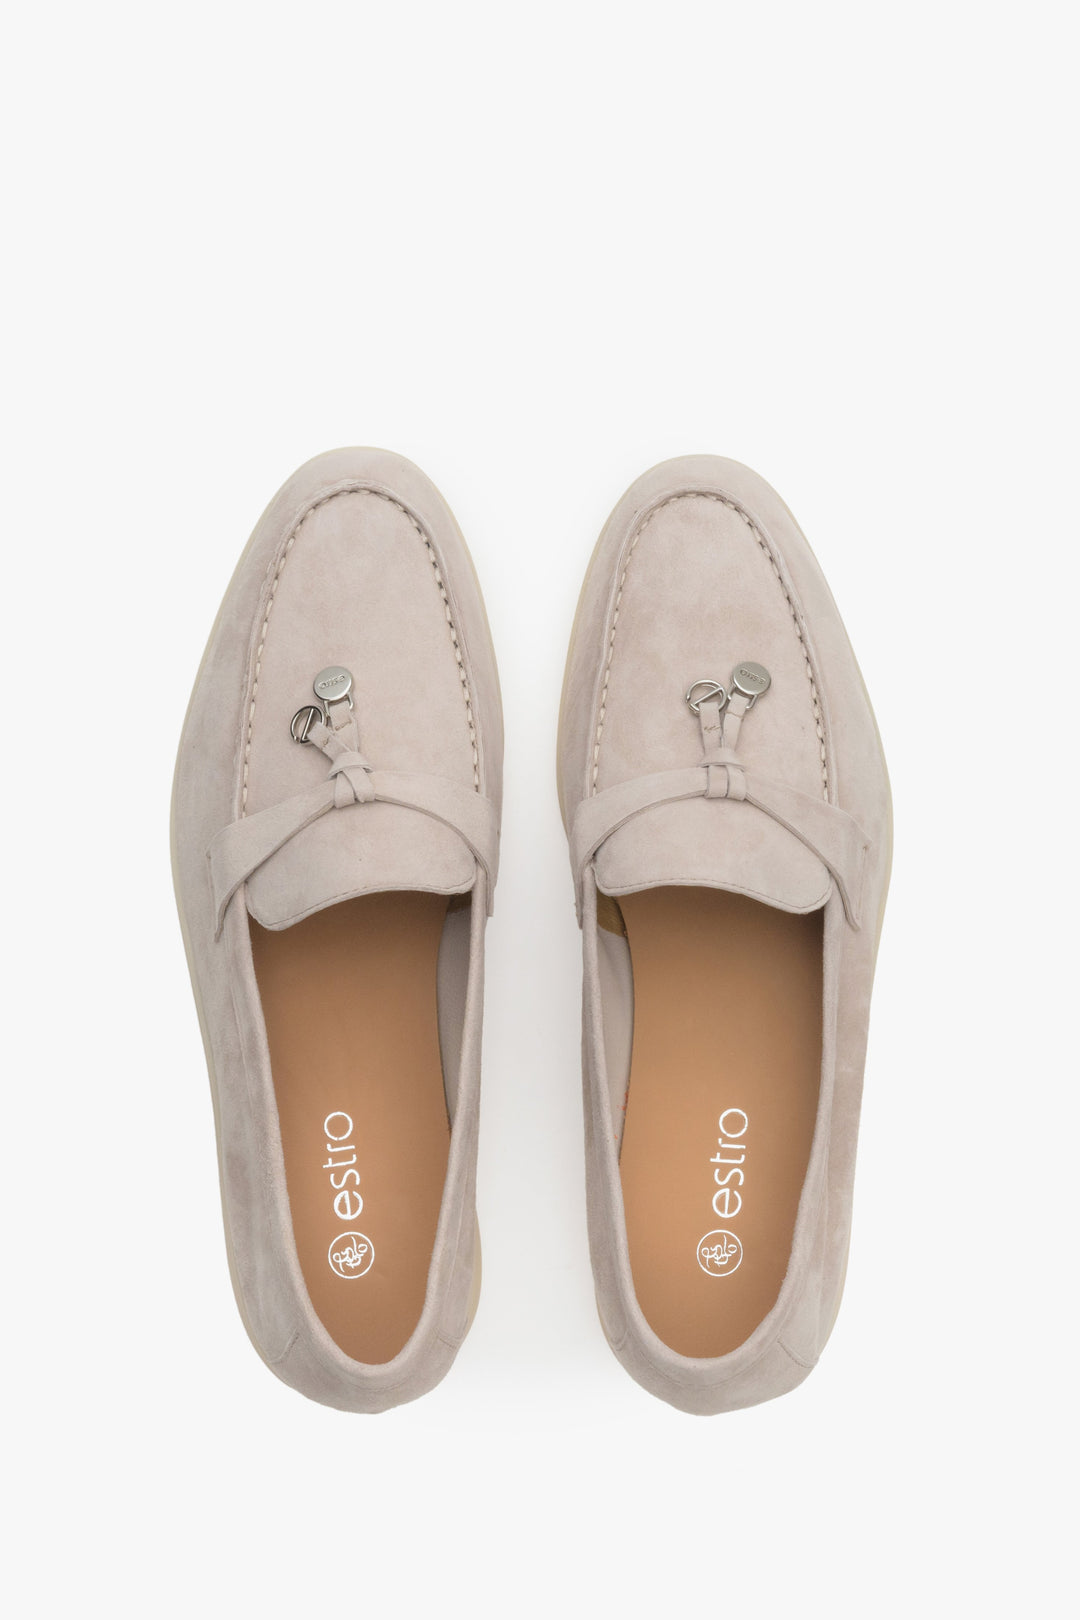 Light beige women's loafers of Estro brand made of velour and leather - presentation of the footwear from above.